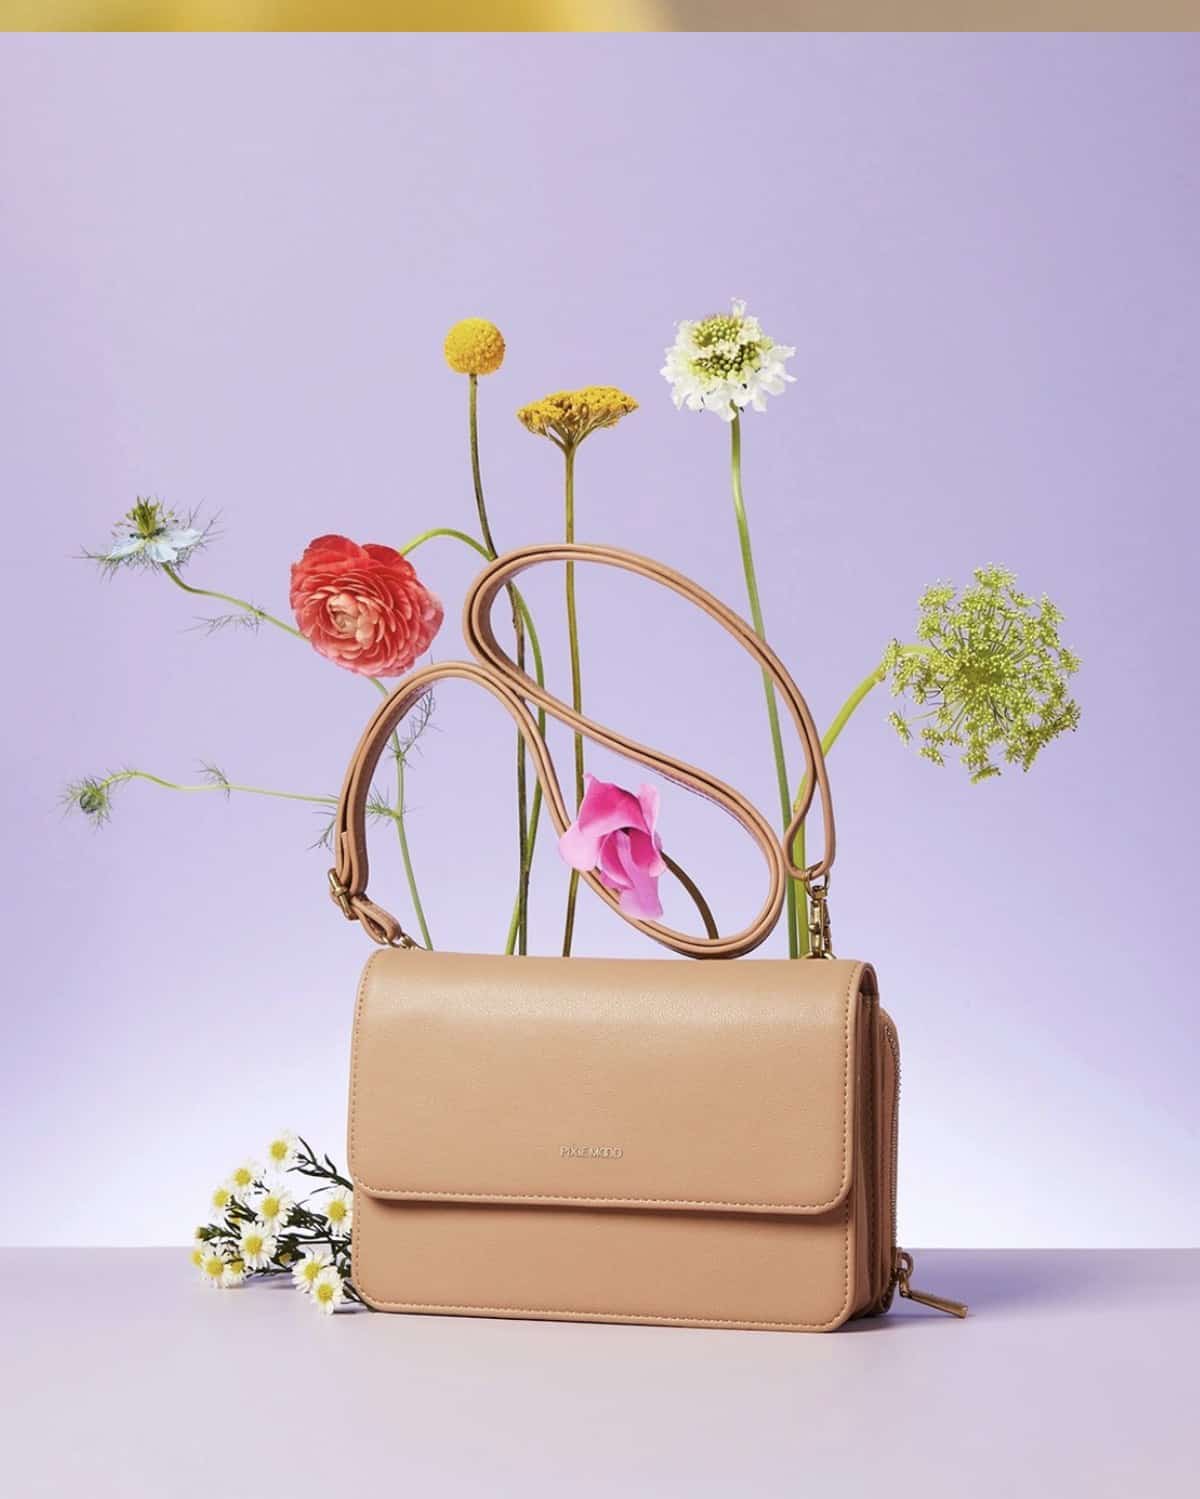 Camel tan small vegan purse from Pixie Mood surrounded by colorful wildflowers. 